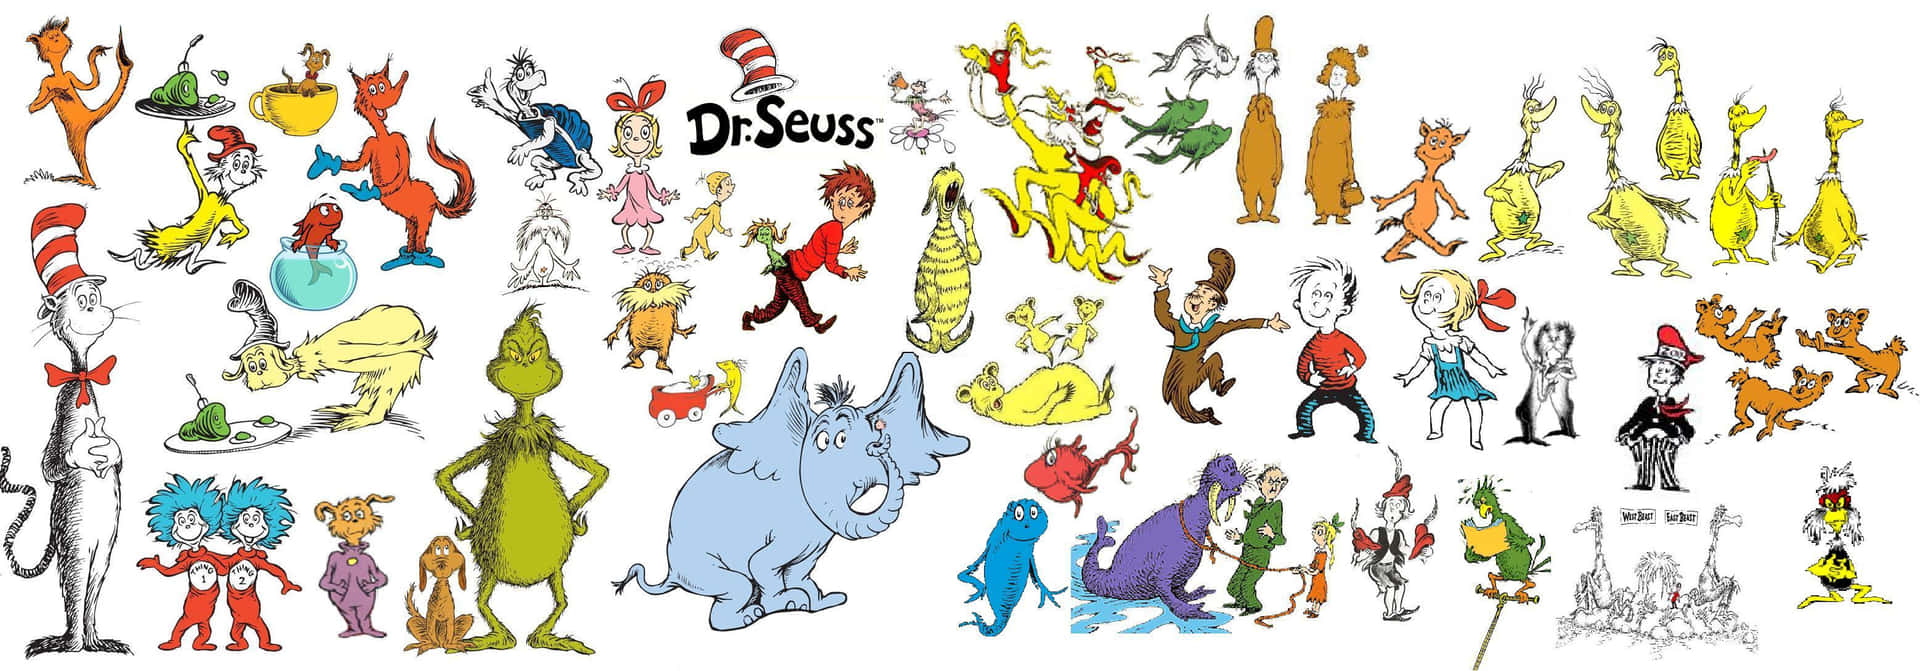 Amazing Dr. Seuss Book Characters Illustration Wallpaper